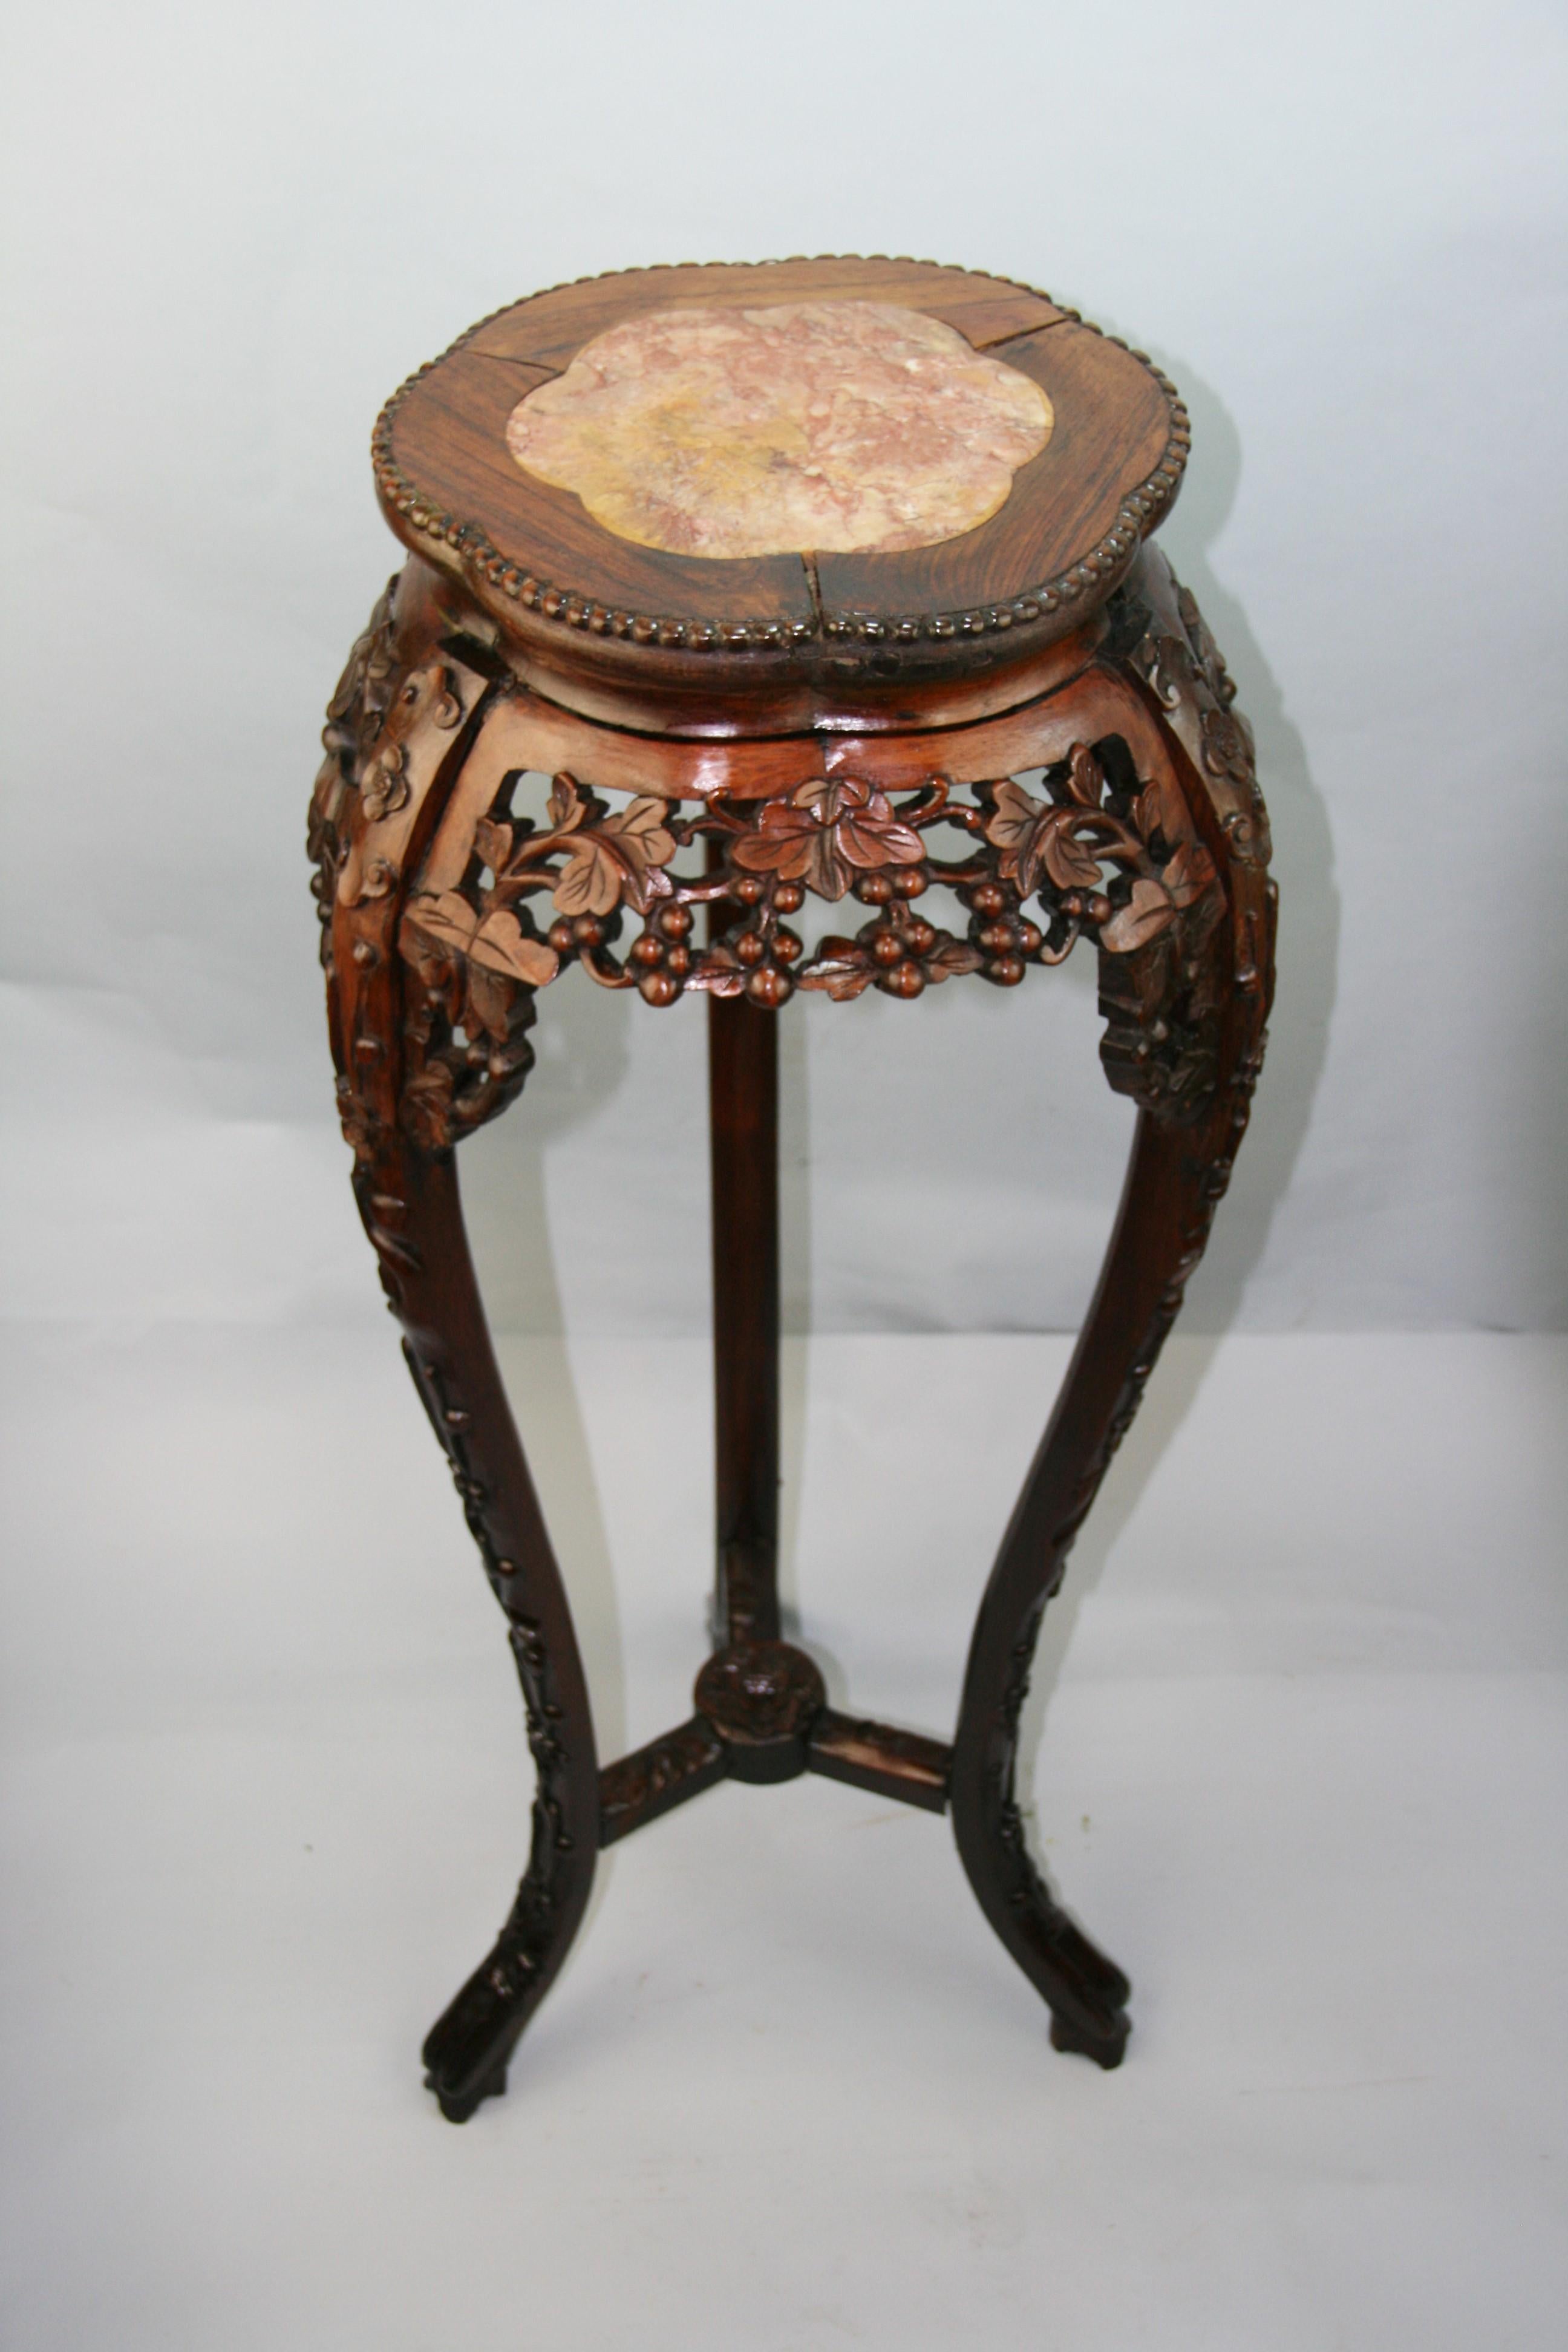 Hand carved rosewood pedestal with inlaid marble. The frieze and apron are carved in leaf and floral motifs as are the legs and cross stretchers.